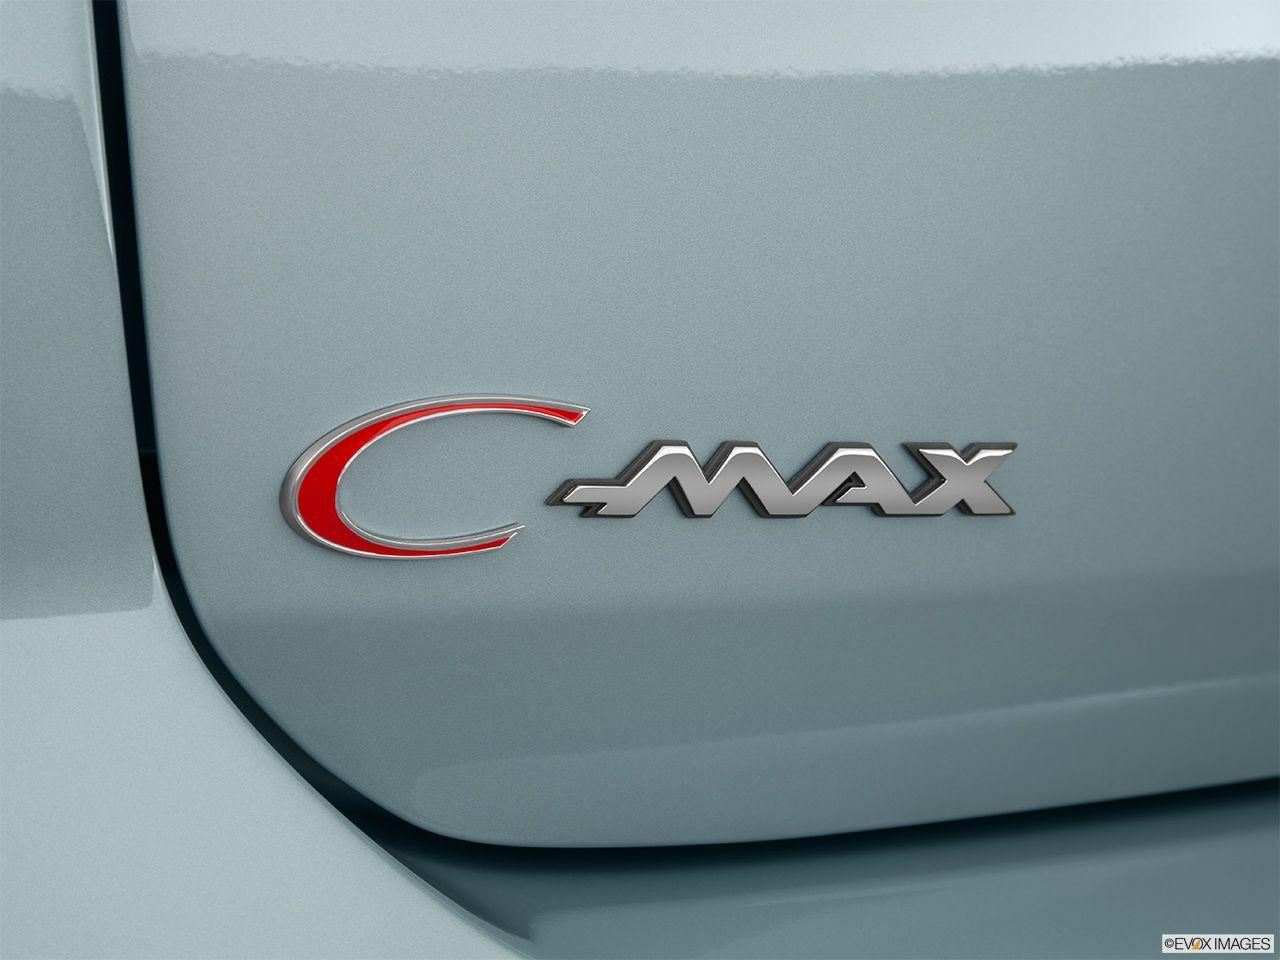 Ford C-Max Logo - Cator Family Car Sales - Ford Specialist